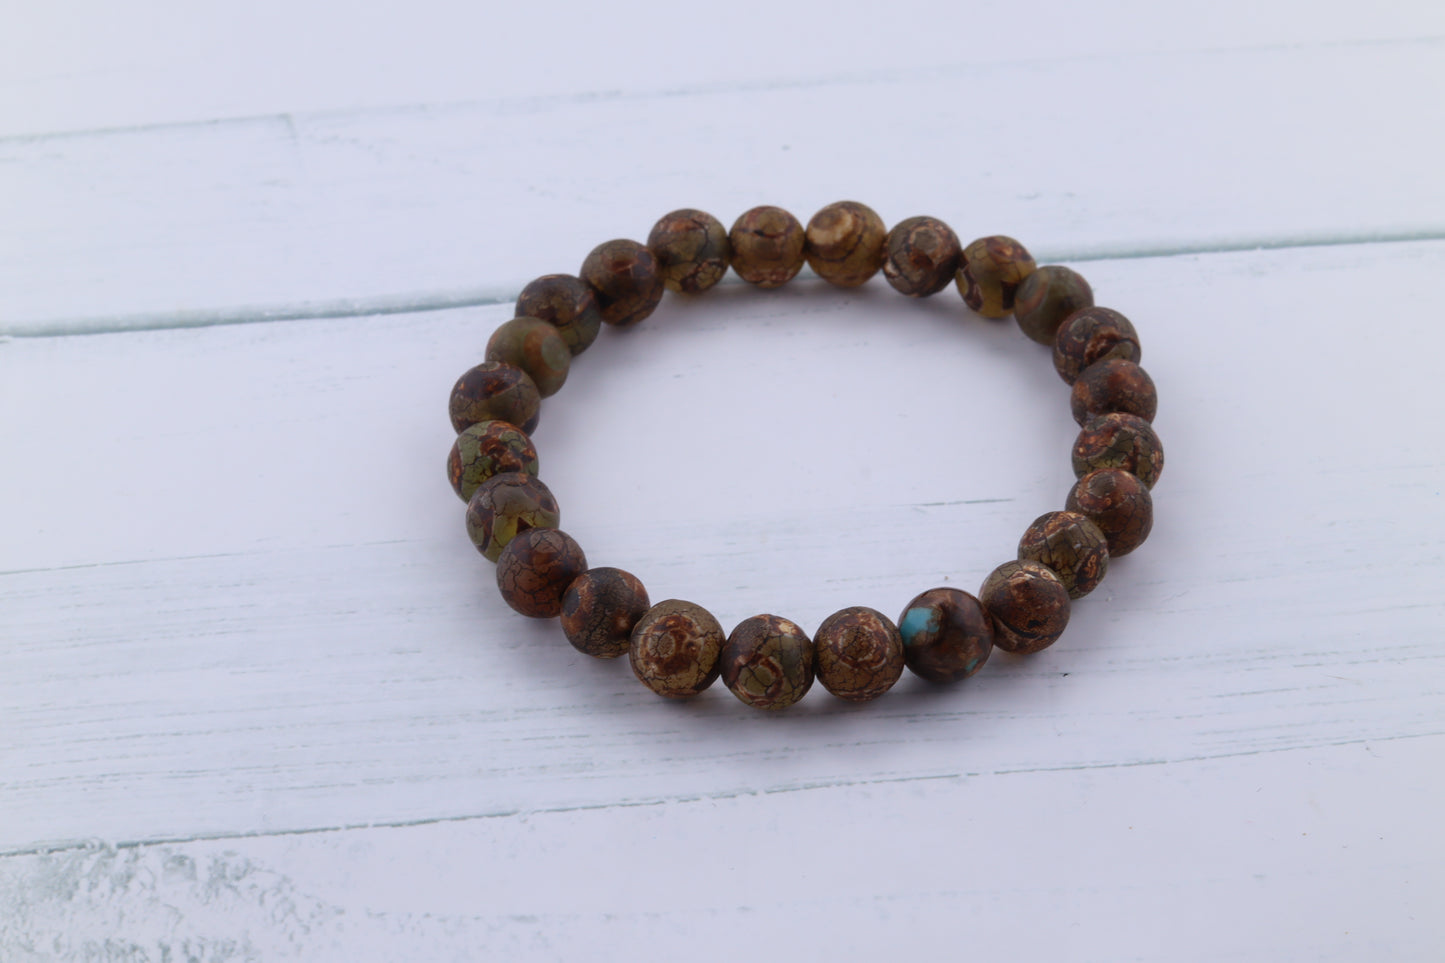 Handmade Brown Agate, Stretch Bracelet. Earth tones with 8mm gemstone beads.